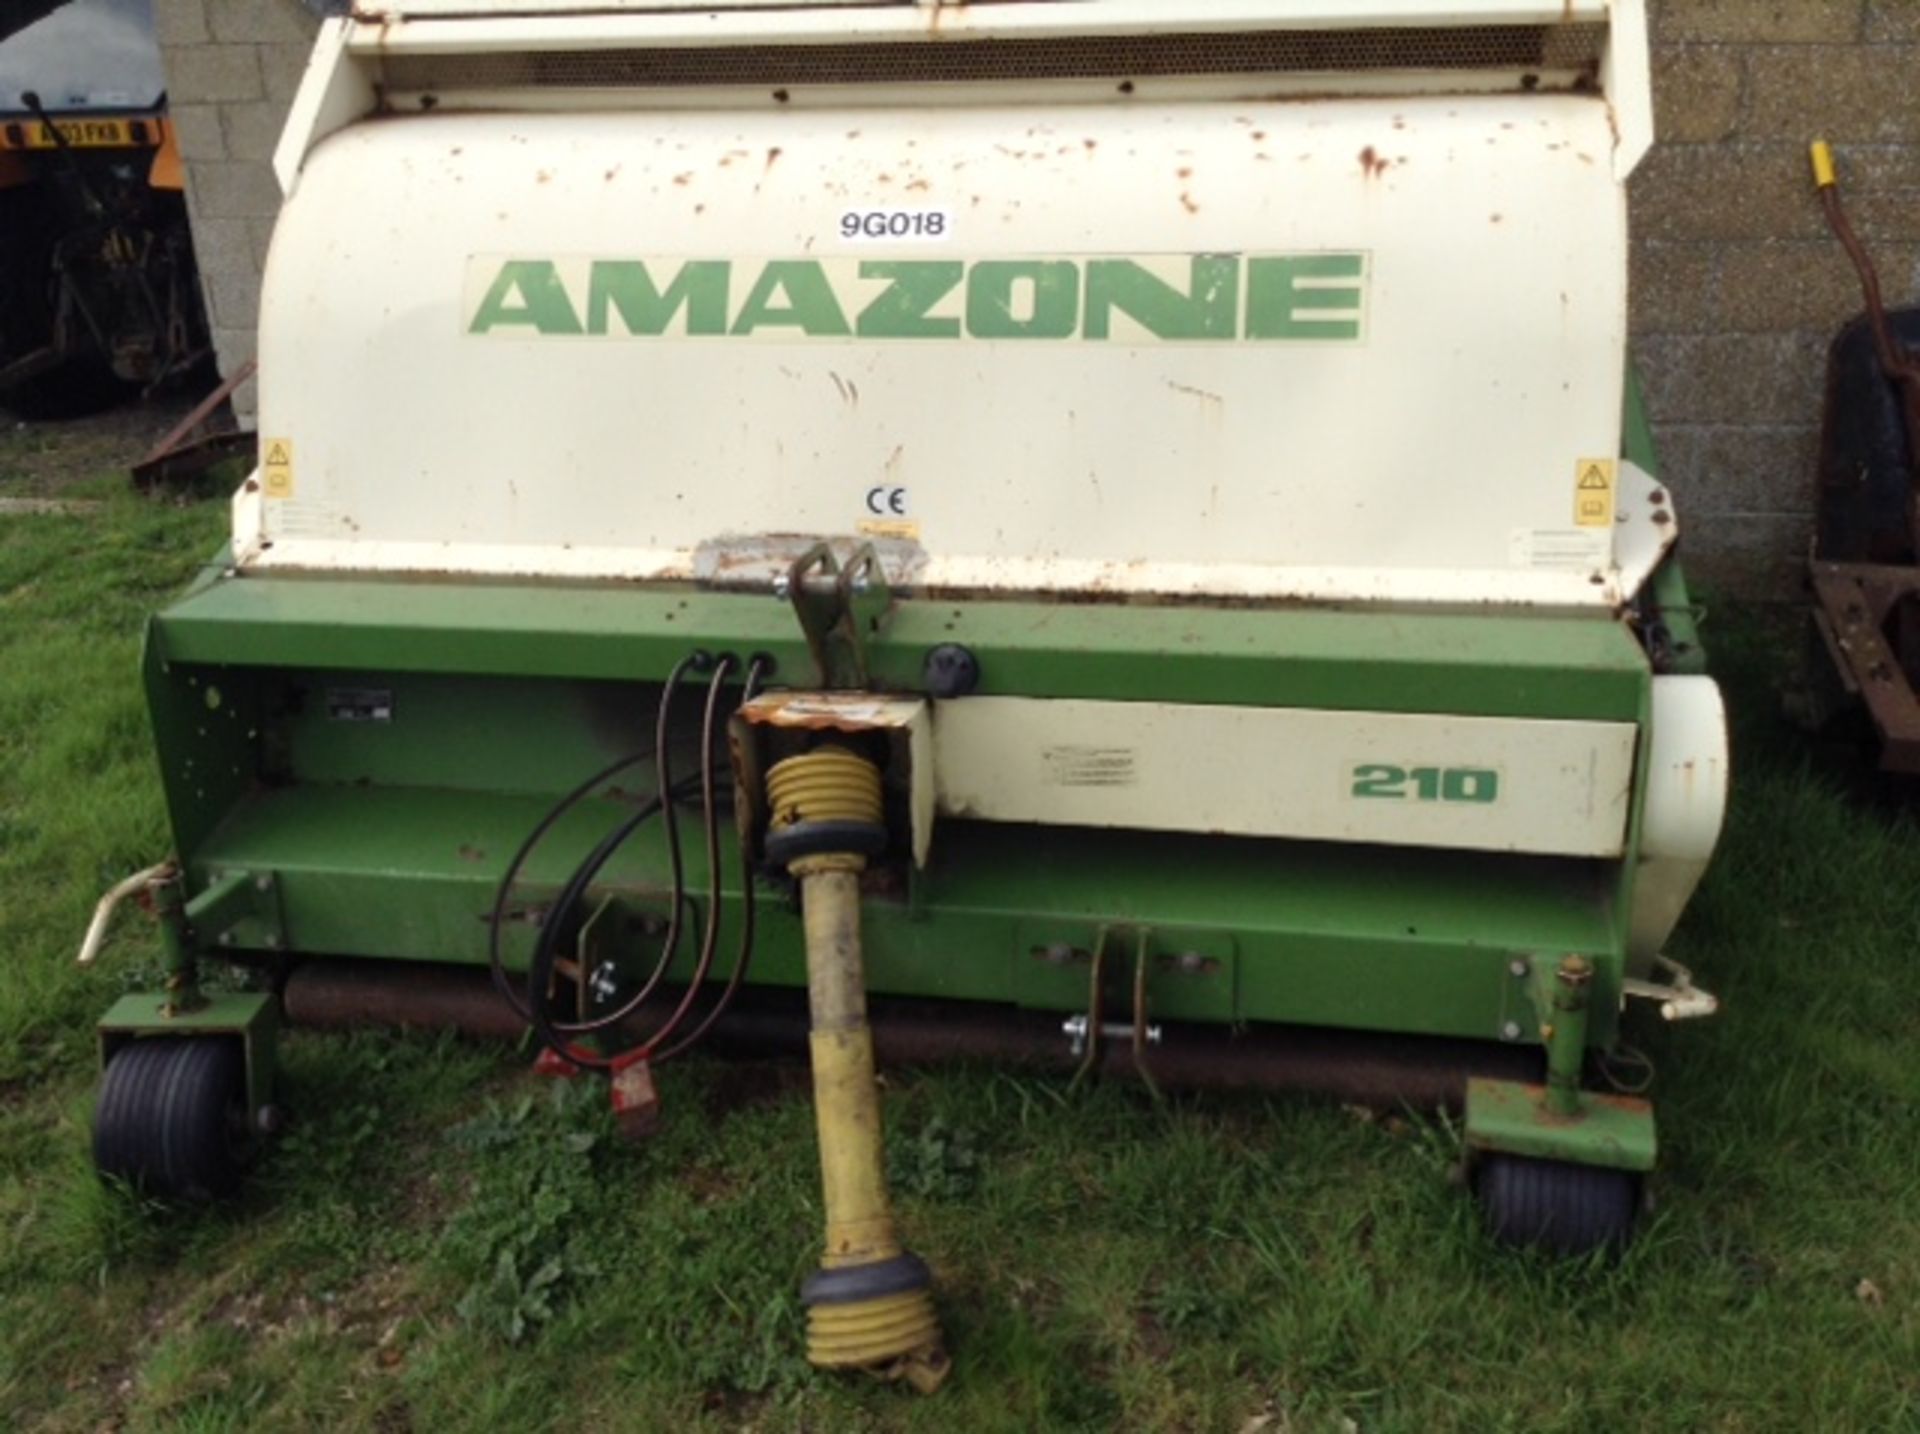 Amazone 210 groundkeeper flail mower stripes collects tractor mounted - Image 4 of 5